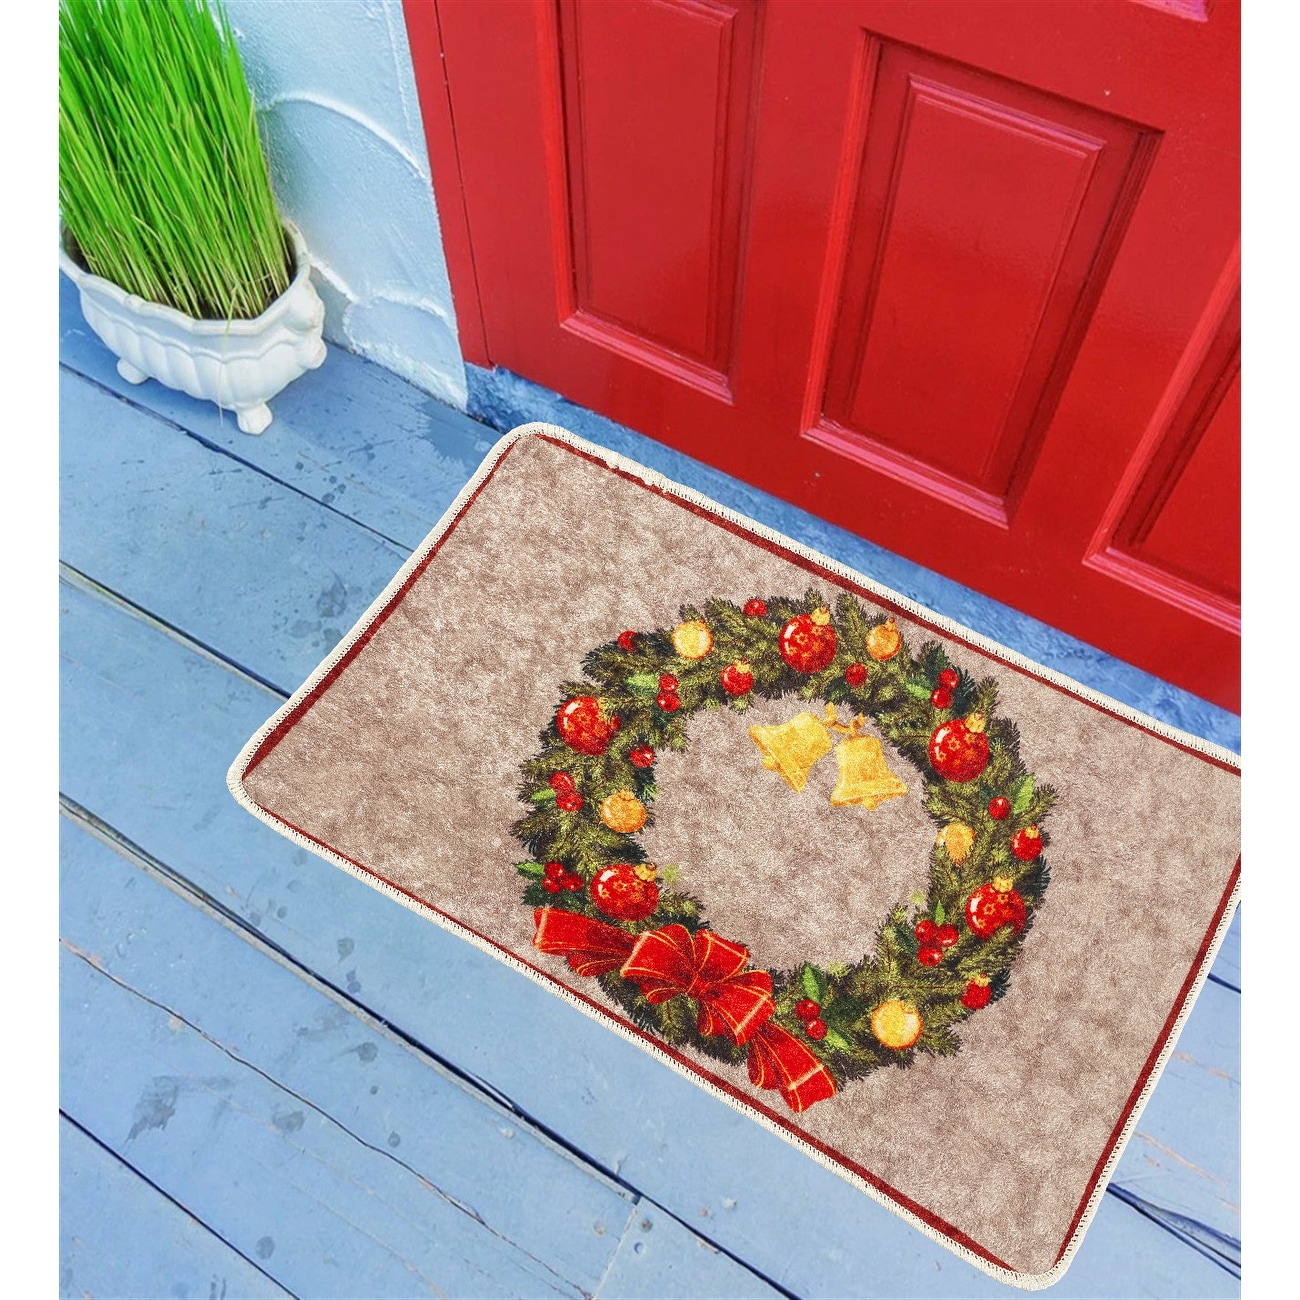 https://ak1.ostkcdn.com/images/products/is/images/direct/79090027c0be6b2e0c70eb004776669901721729/Winter-Floor-Mat%2C-30x20.jpg